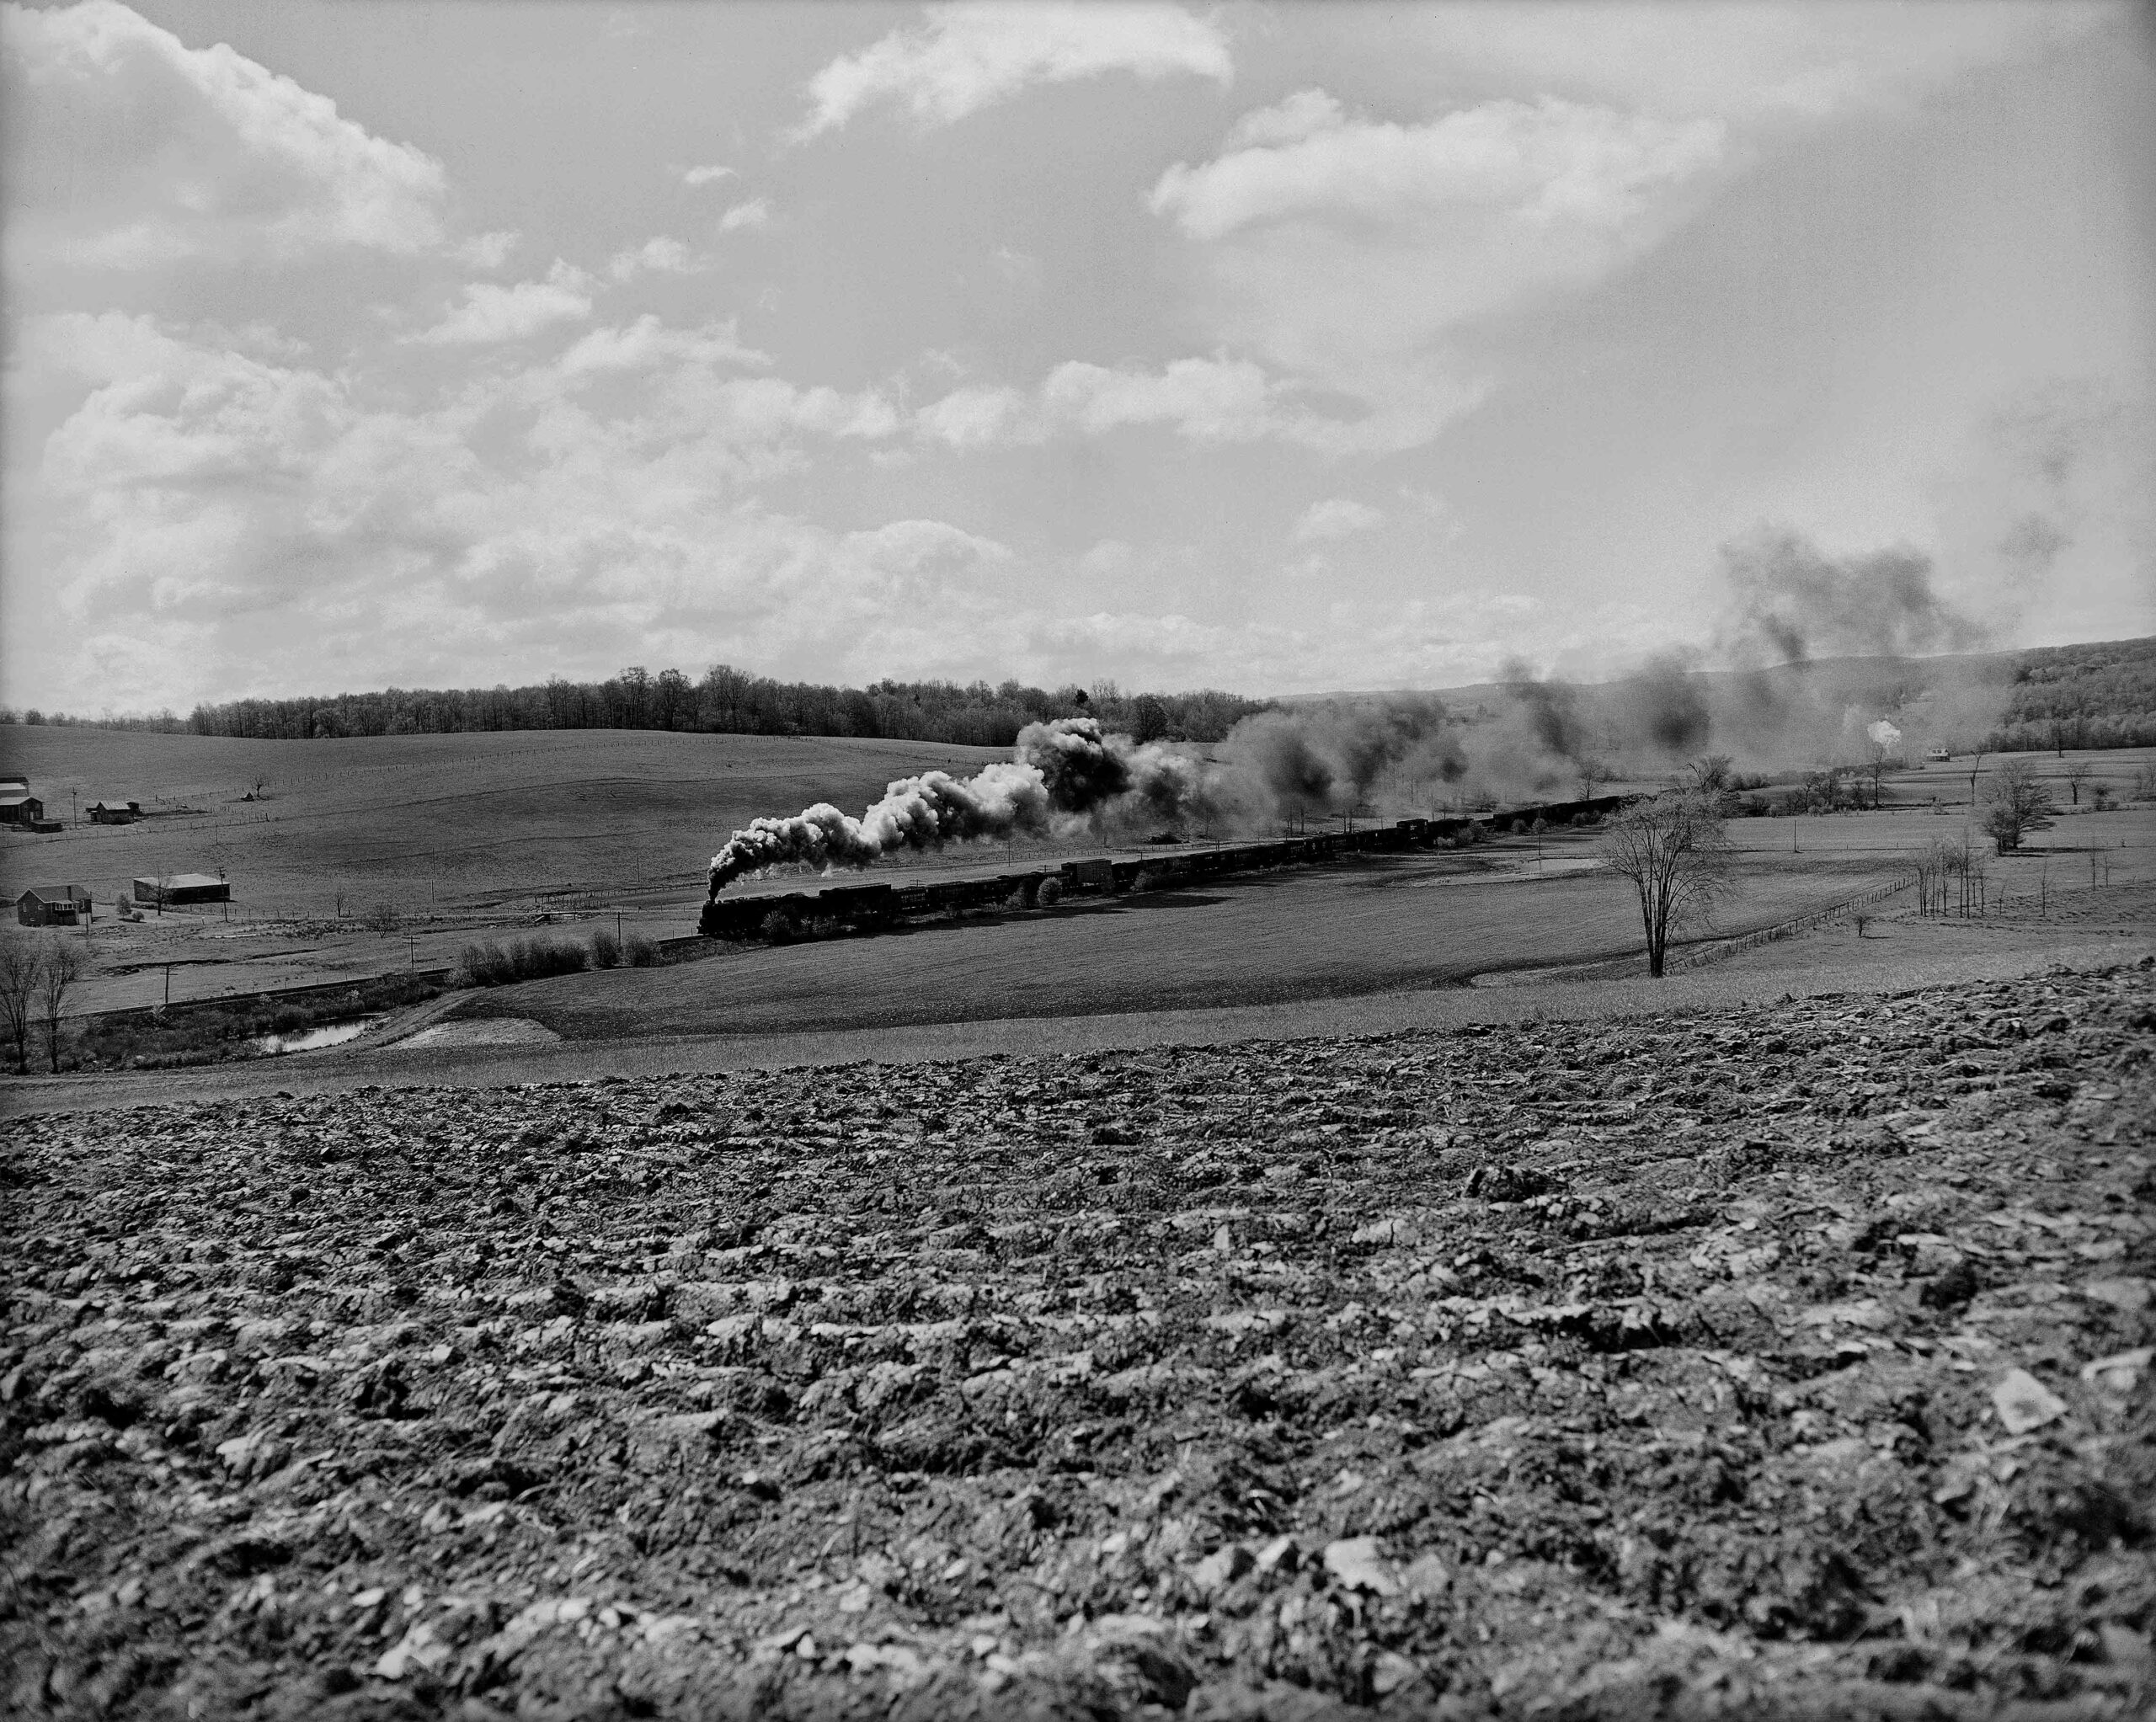 The Call of Trains: Railroad Photographs by Jim Shaughnessy